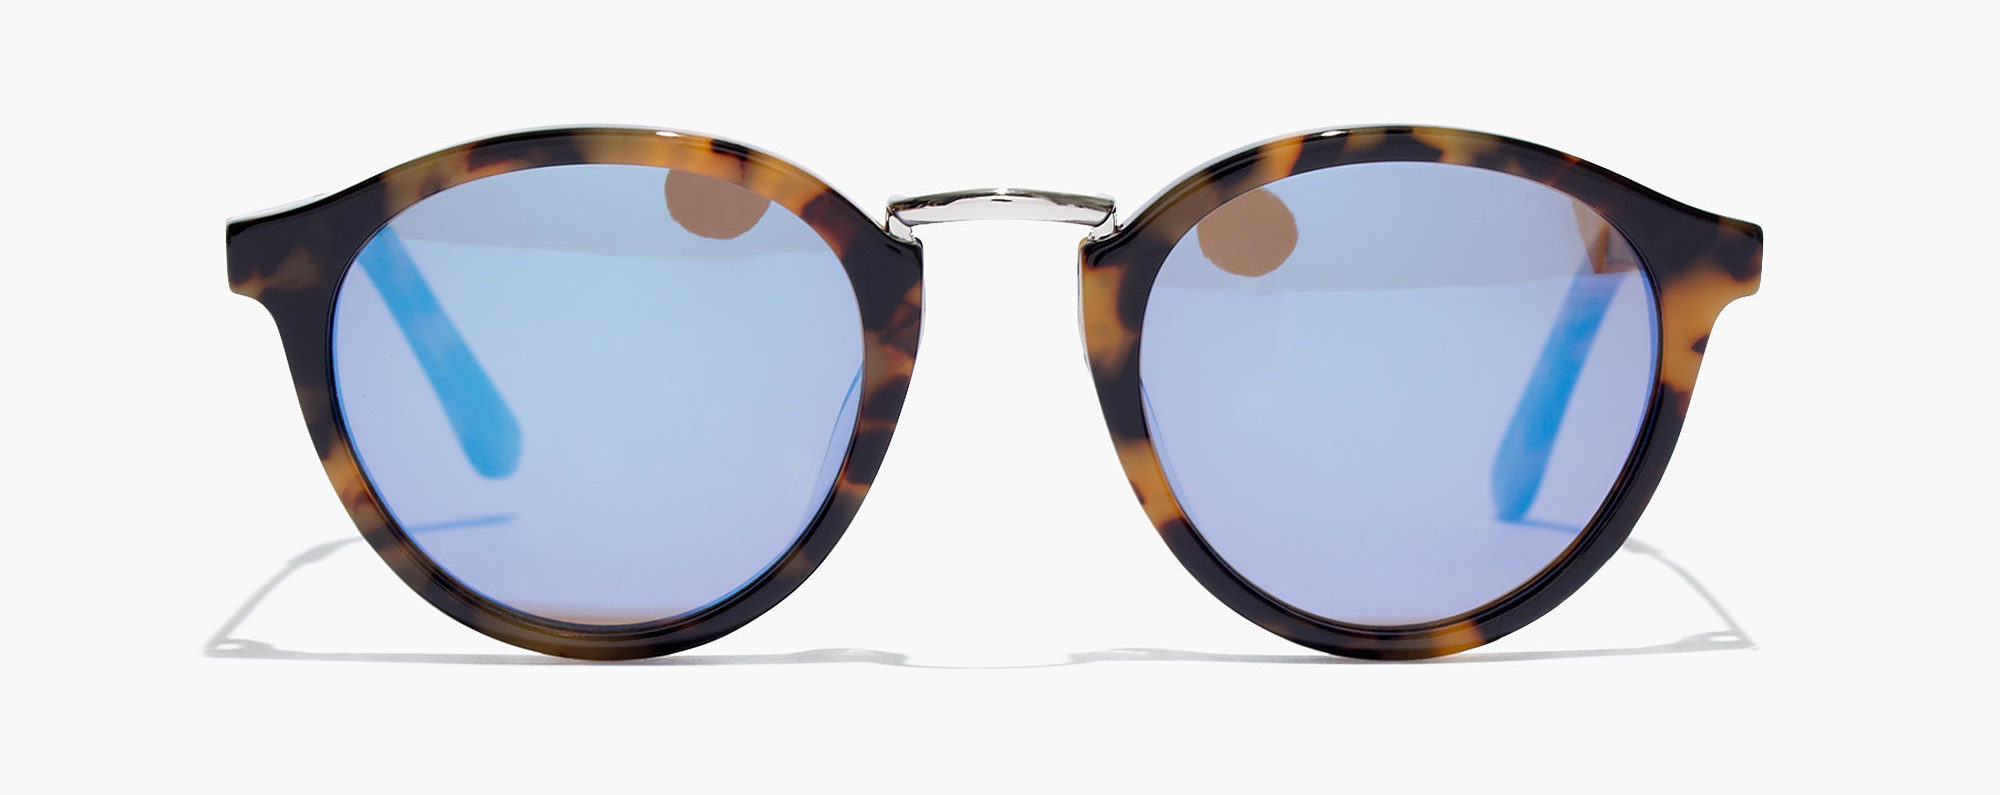 Madewell Indio sunglasses with tortoise frame and blue lenses